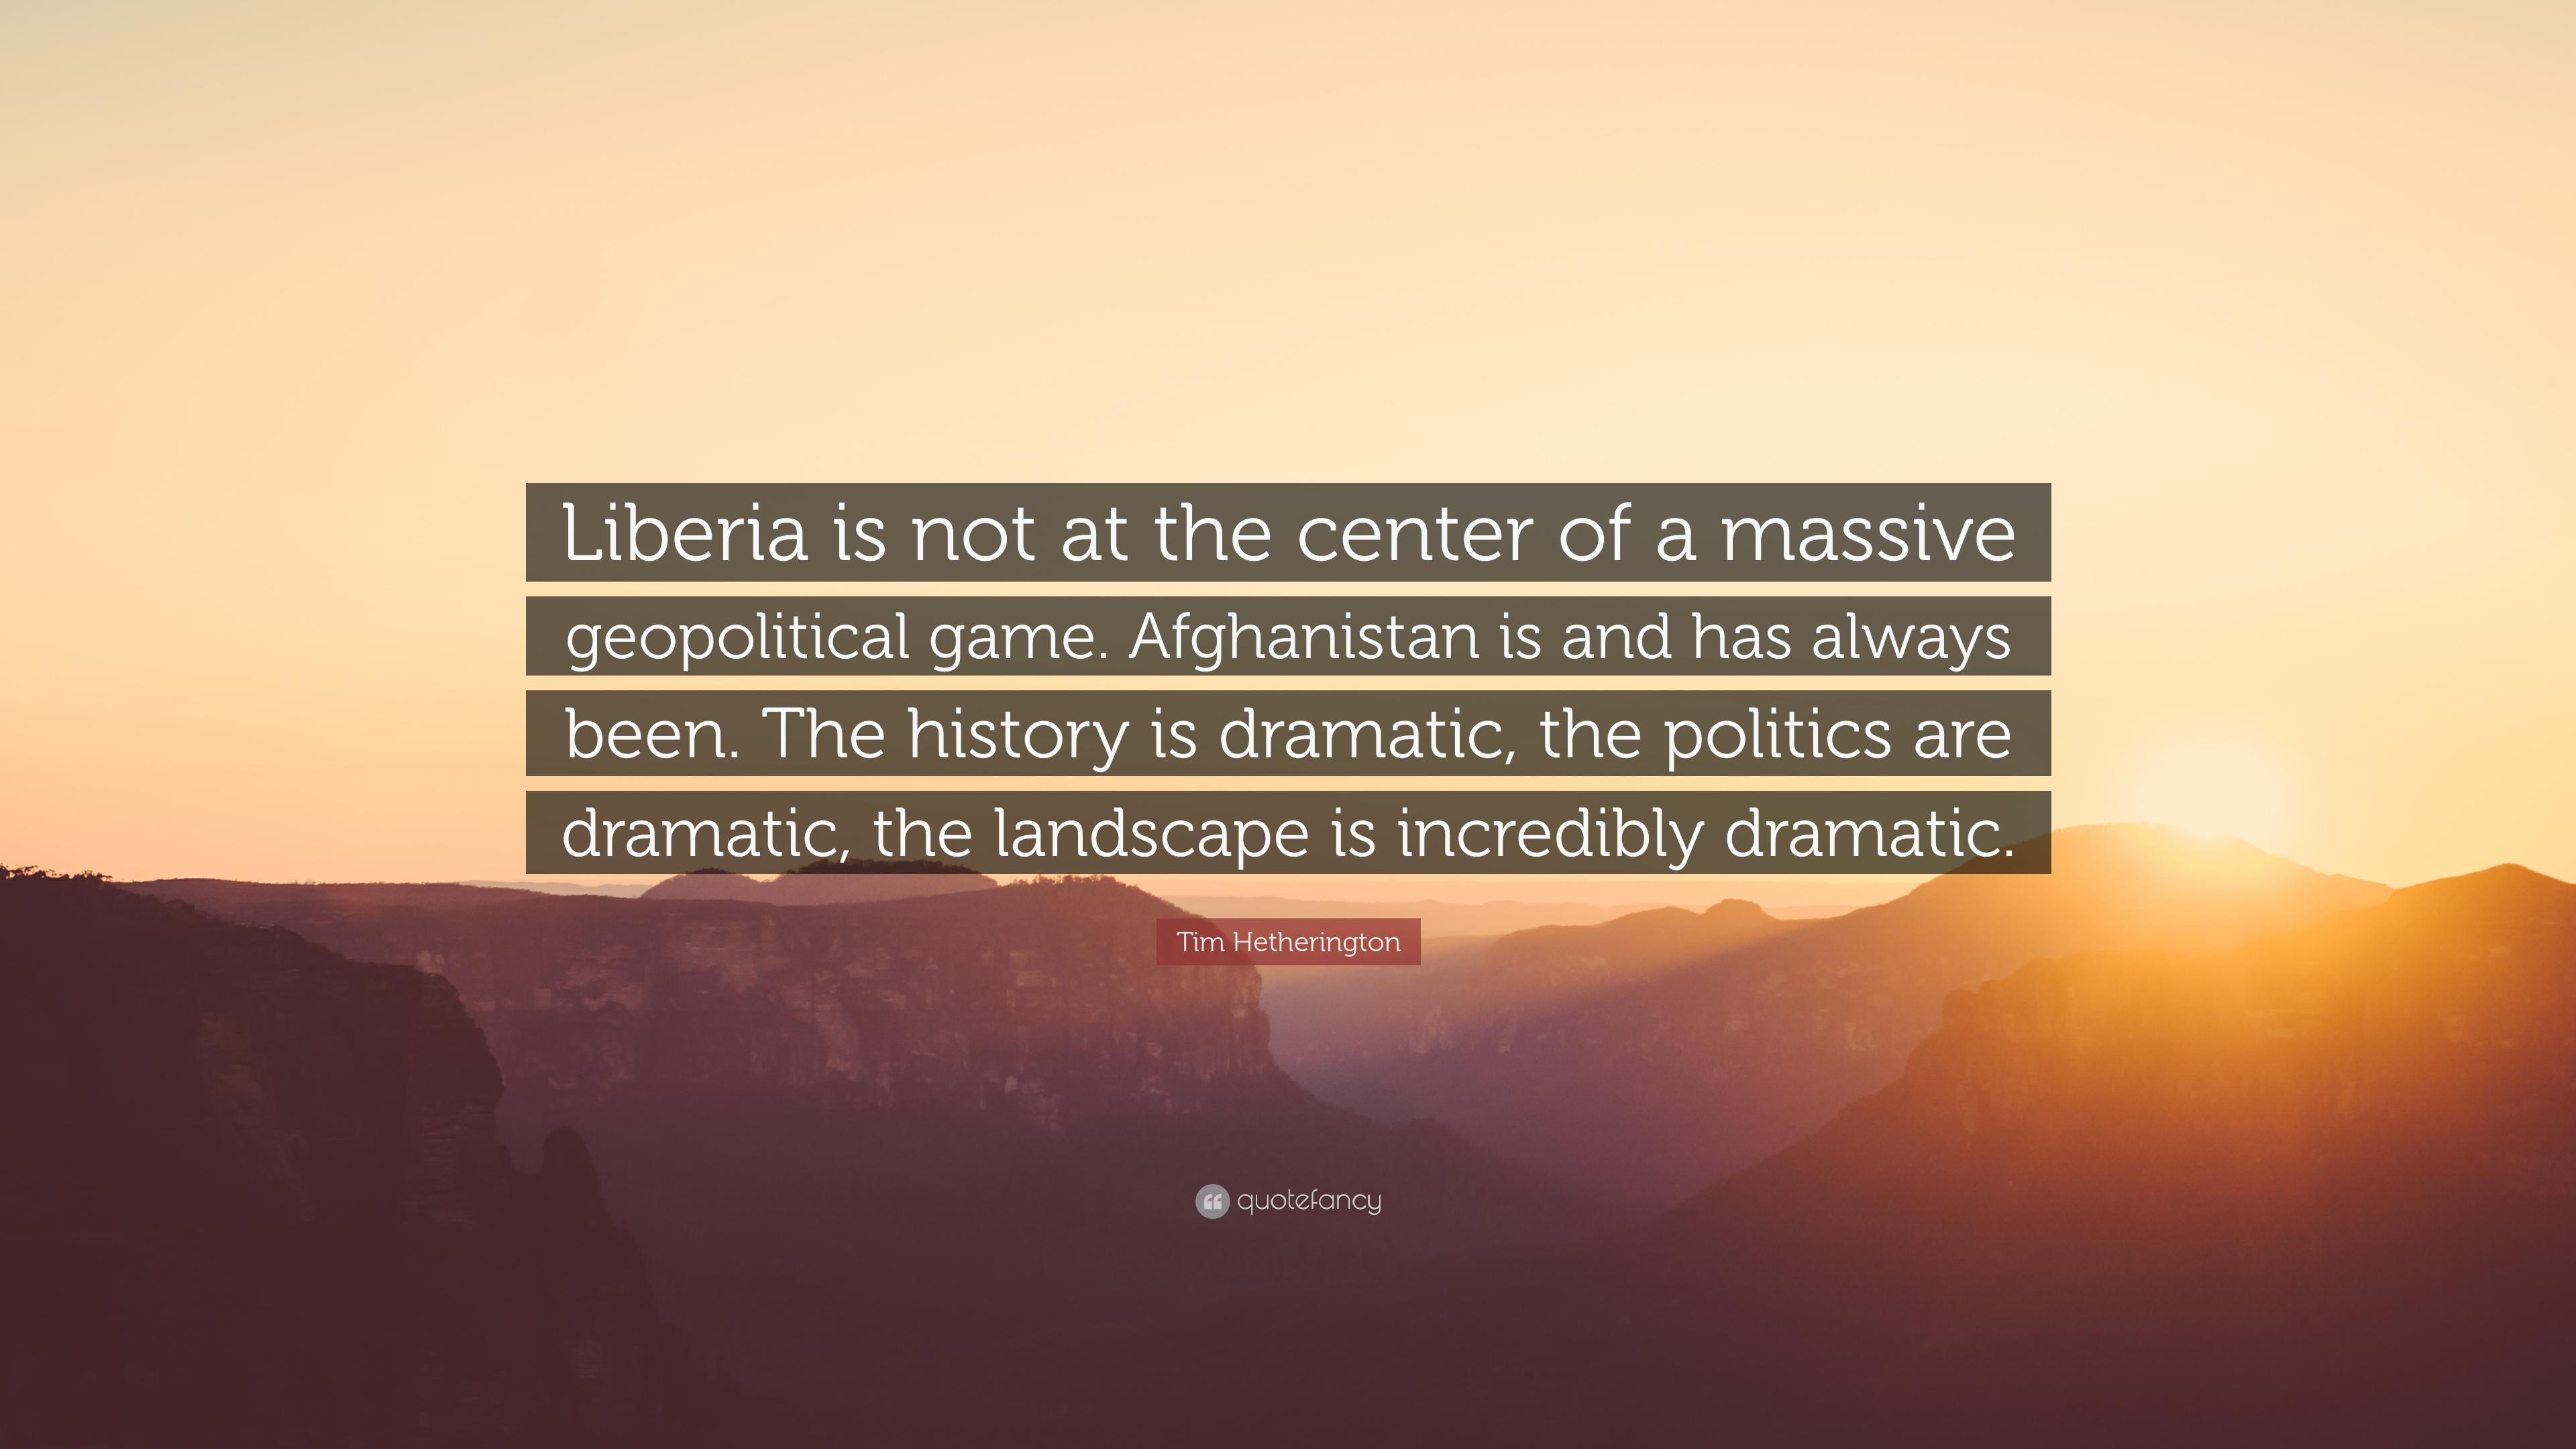 Tim Hetherington Quote: “Liberia is not at the center of a massive